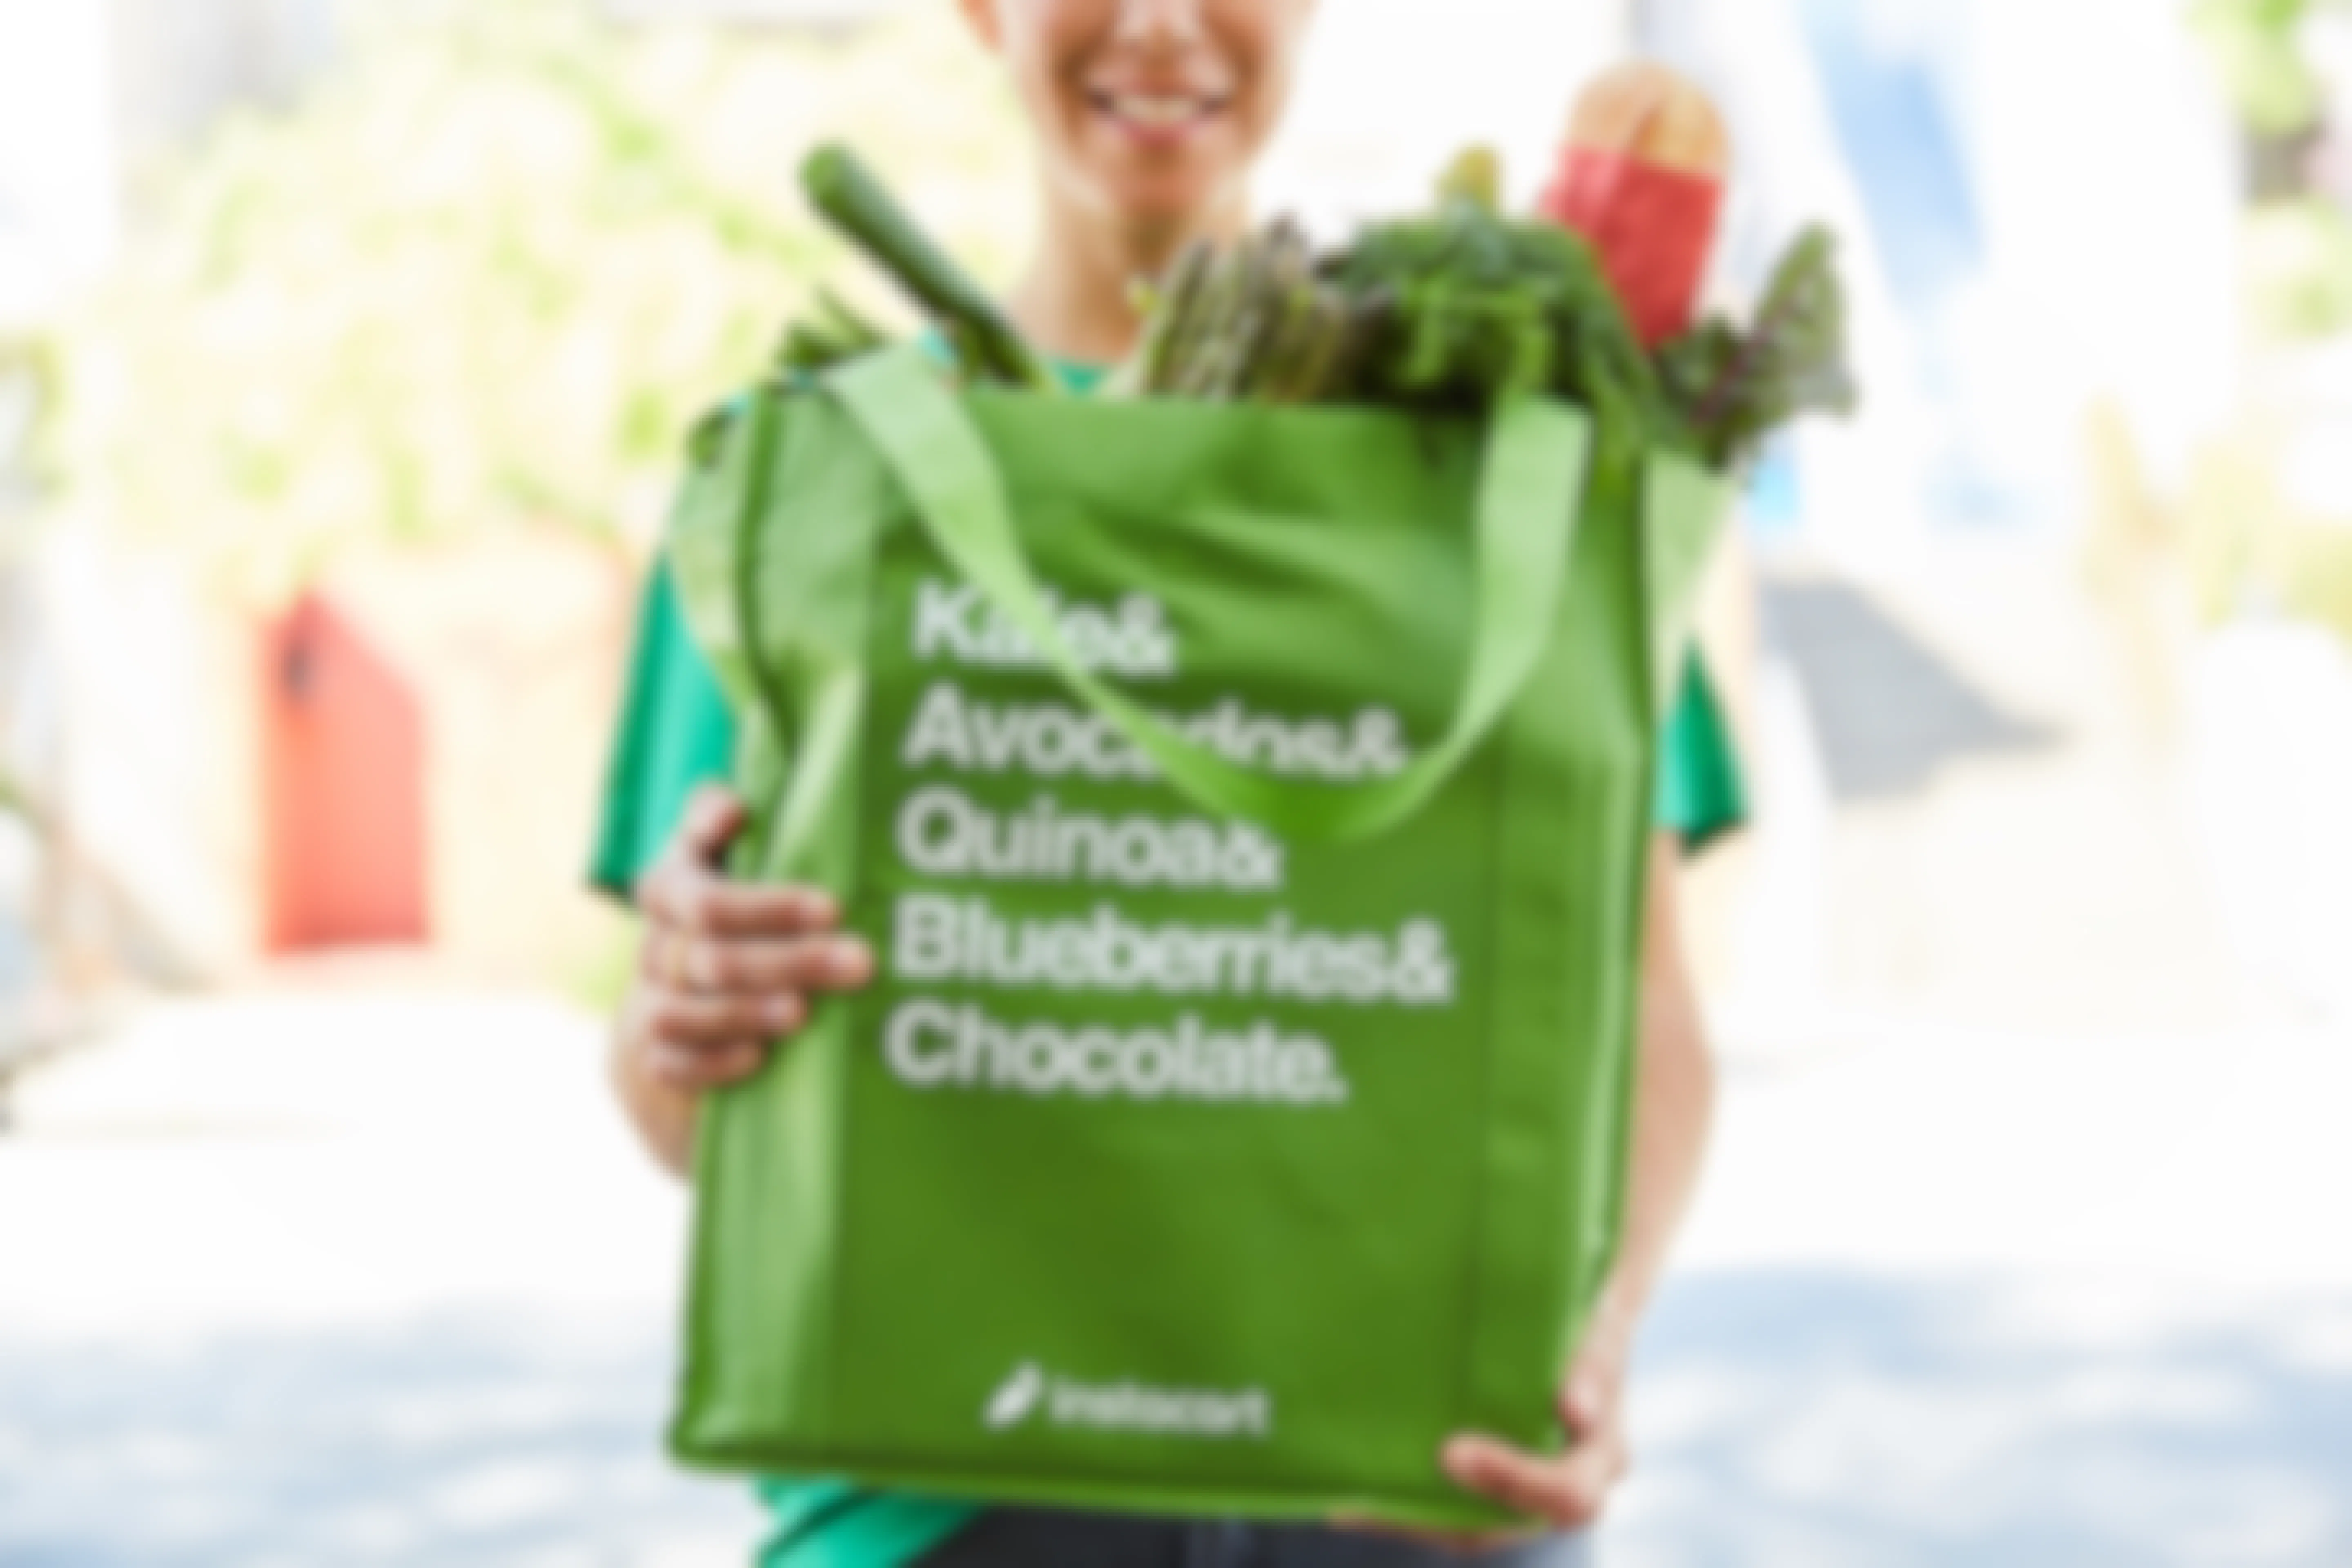 An Instacart delivery person holding Instacart shopping bag full of groceries.